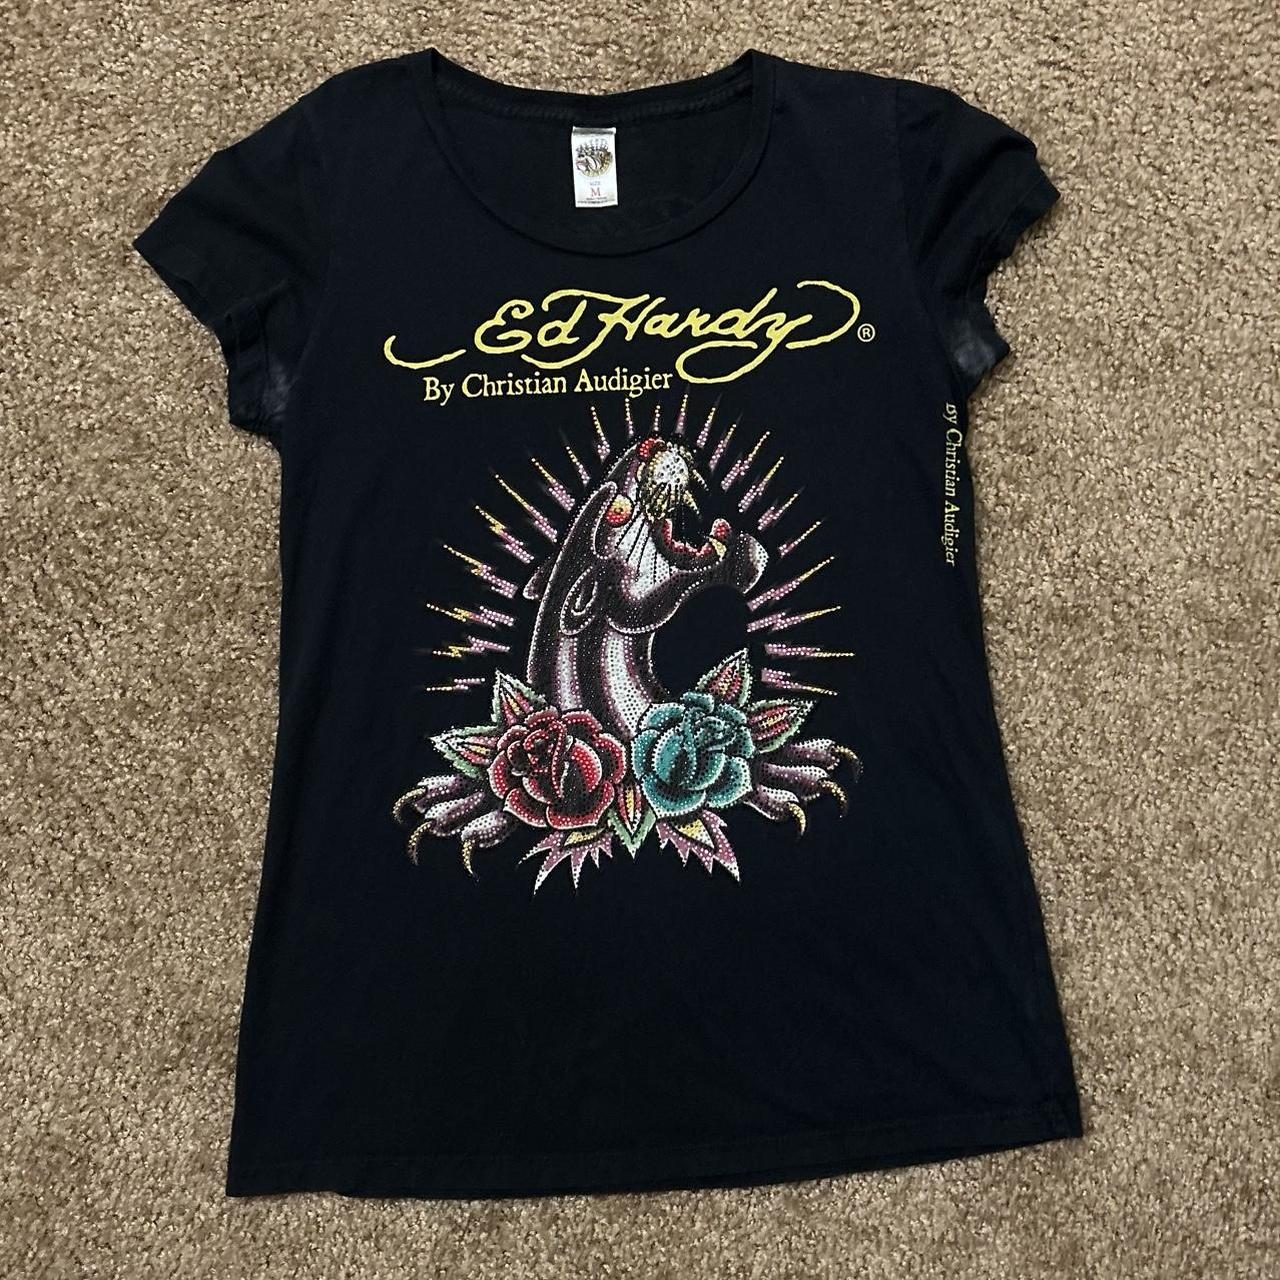 Sick Ed Hardy T Shirt 💋🔥 There are some deodorant... - Depop